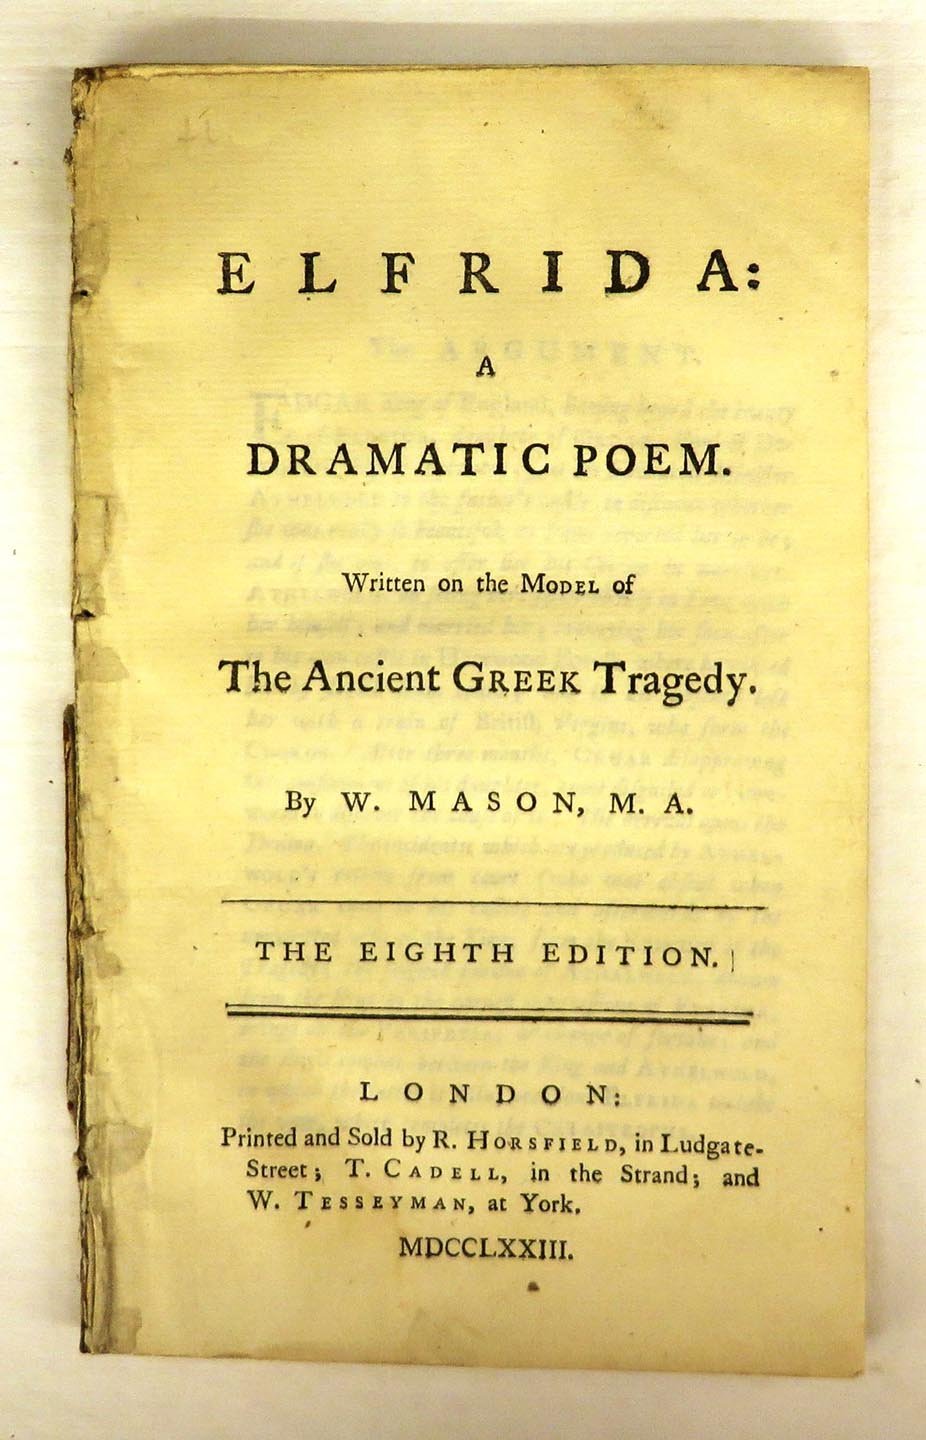 Elfrida: A Dramatic Poem. Written on the Model of The Ancient Greek Tragedy